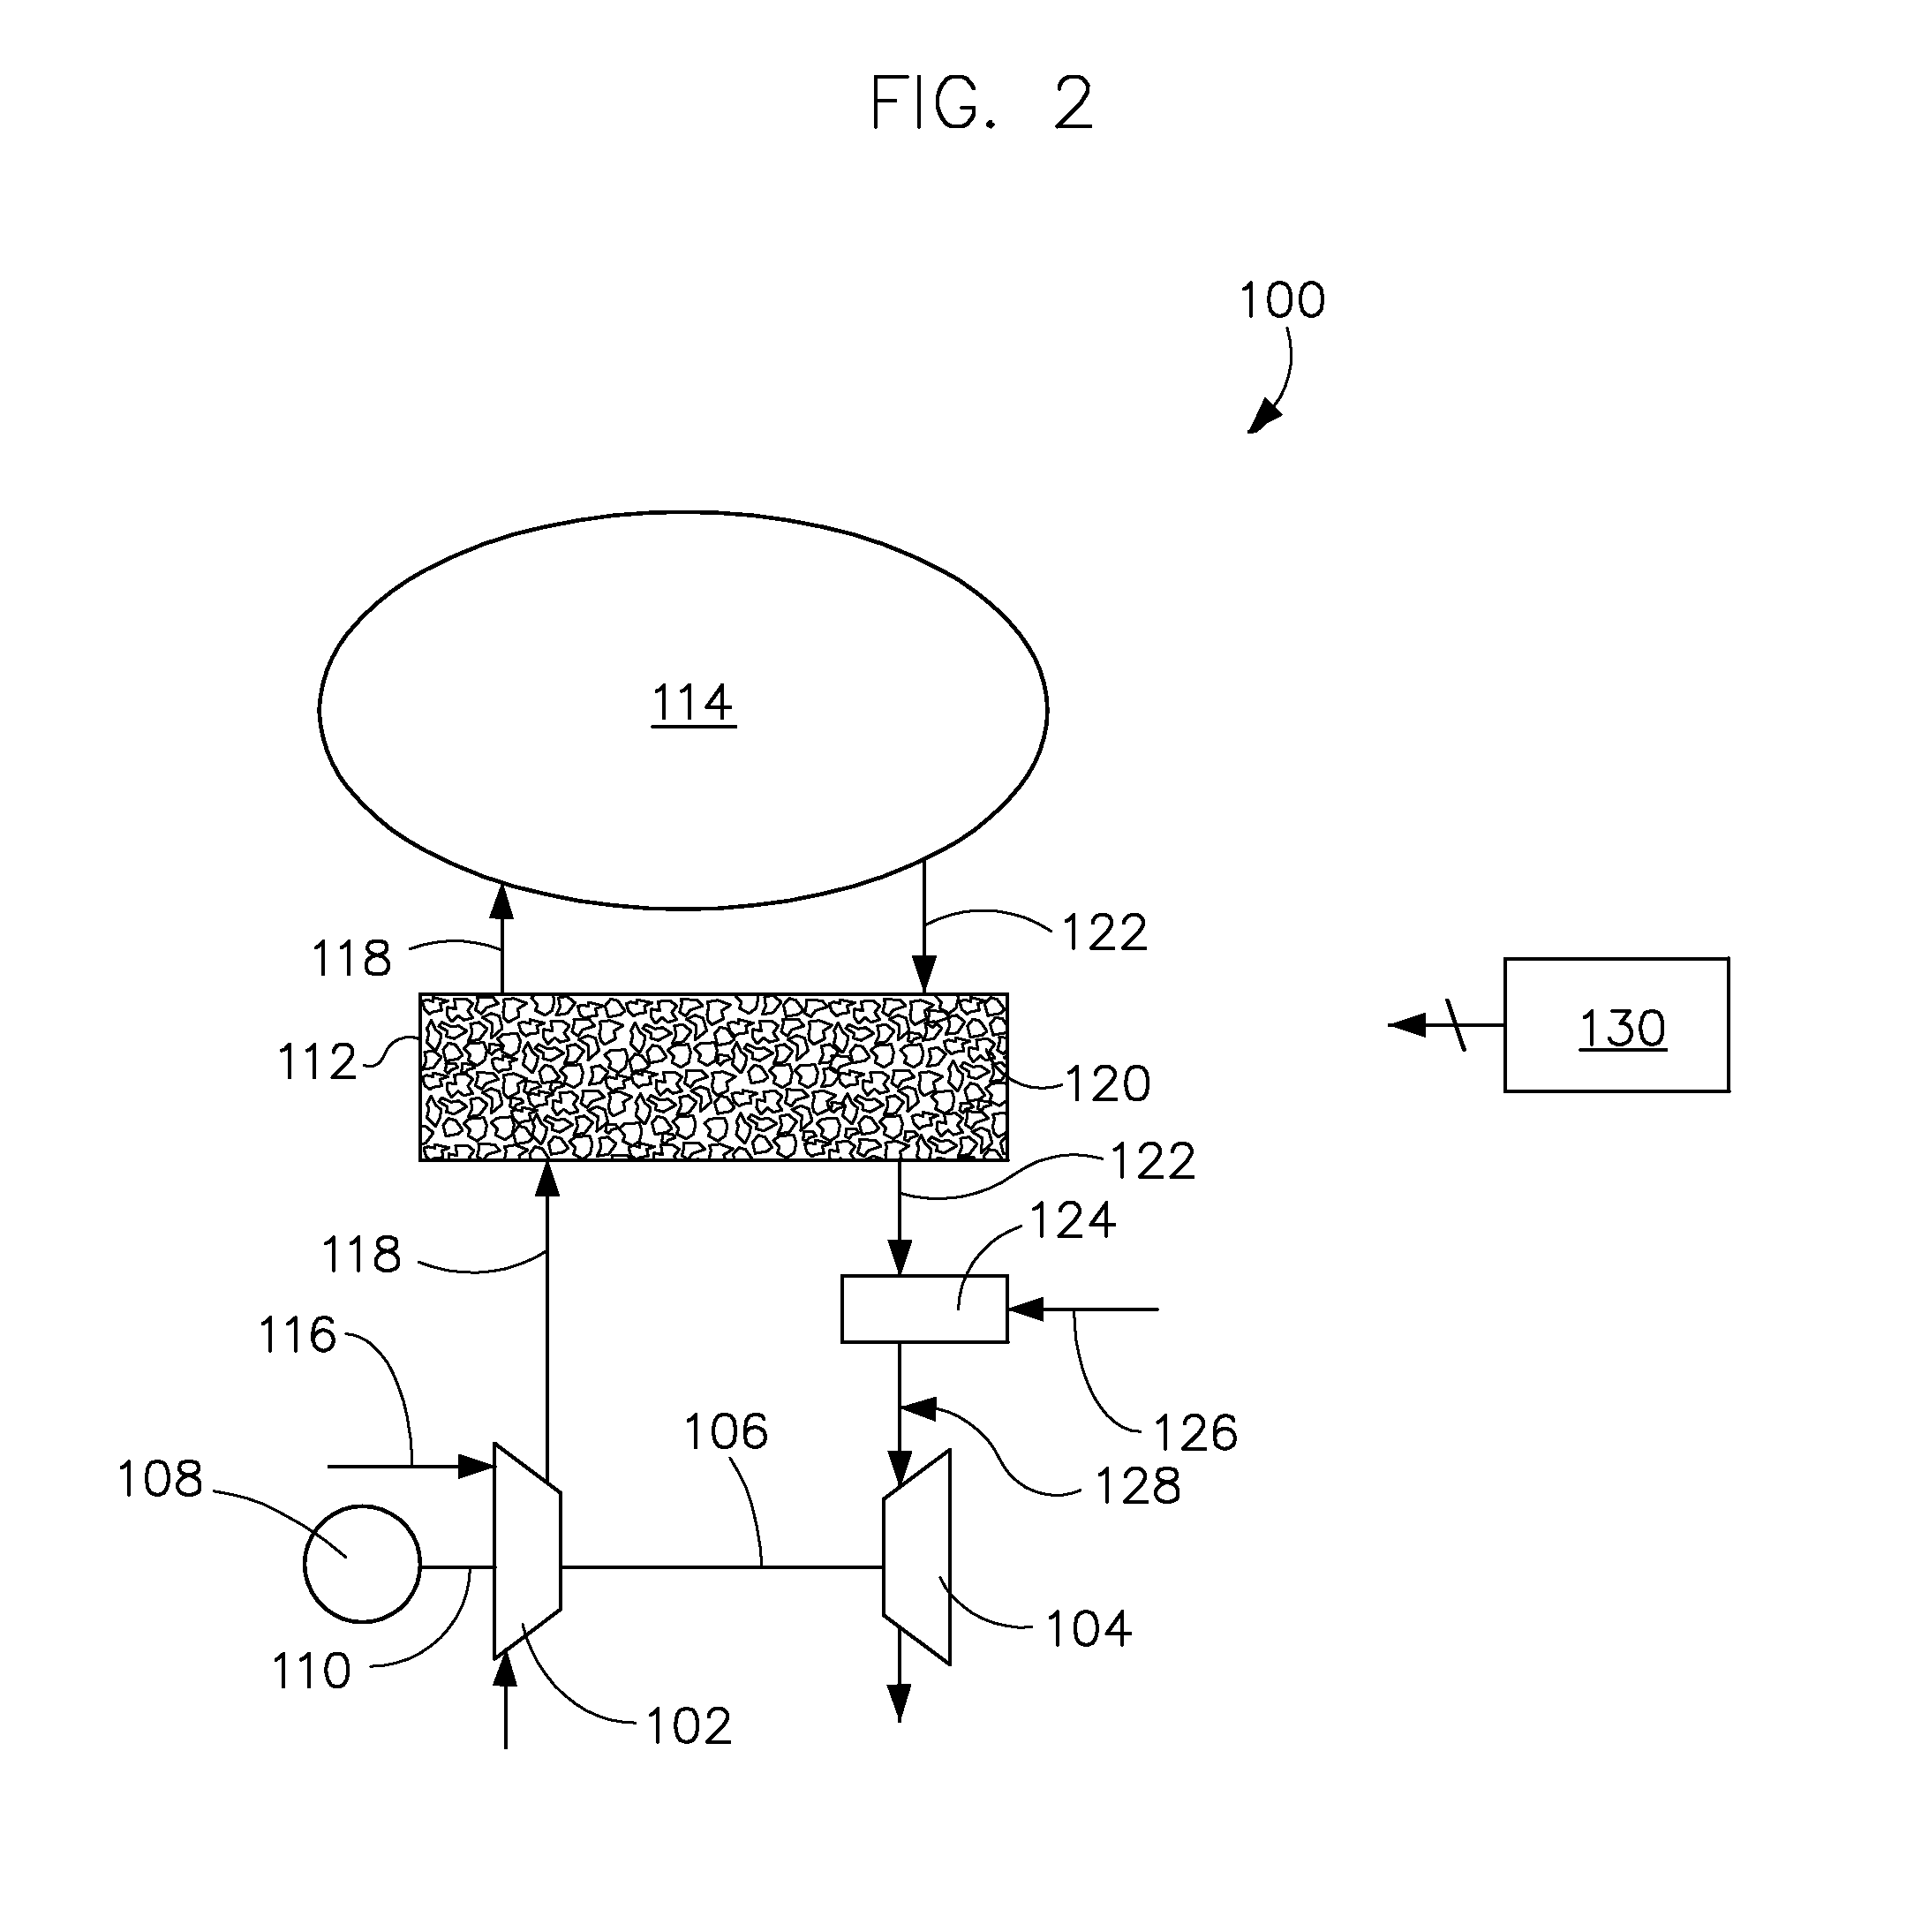 Adiabatic compressed air energy storage system with combustor